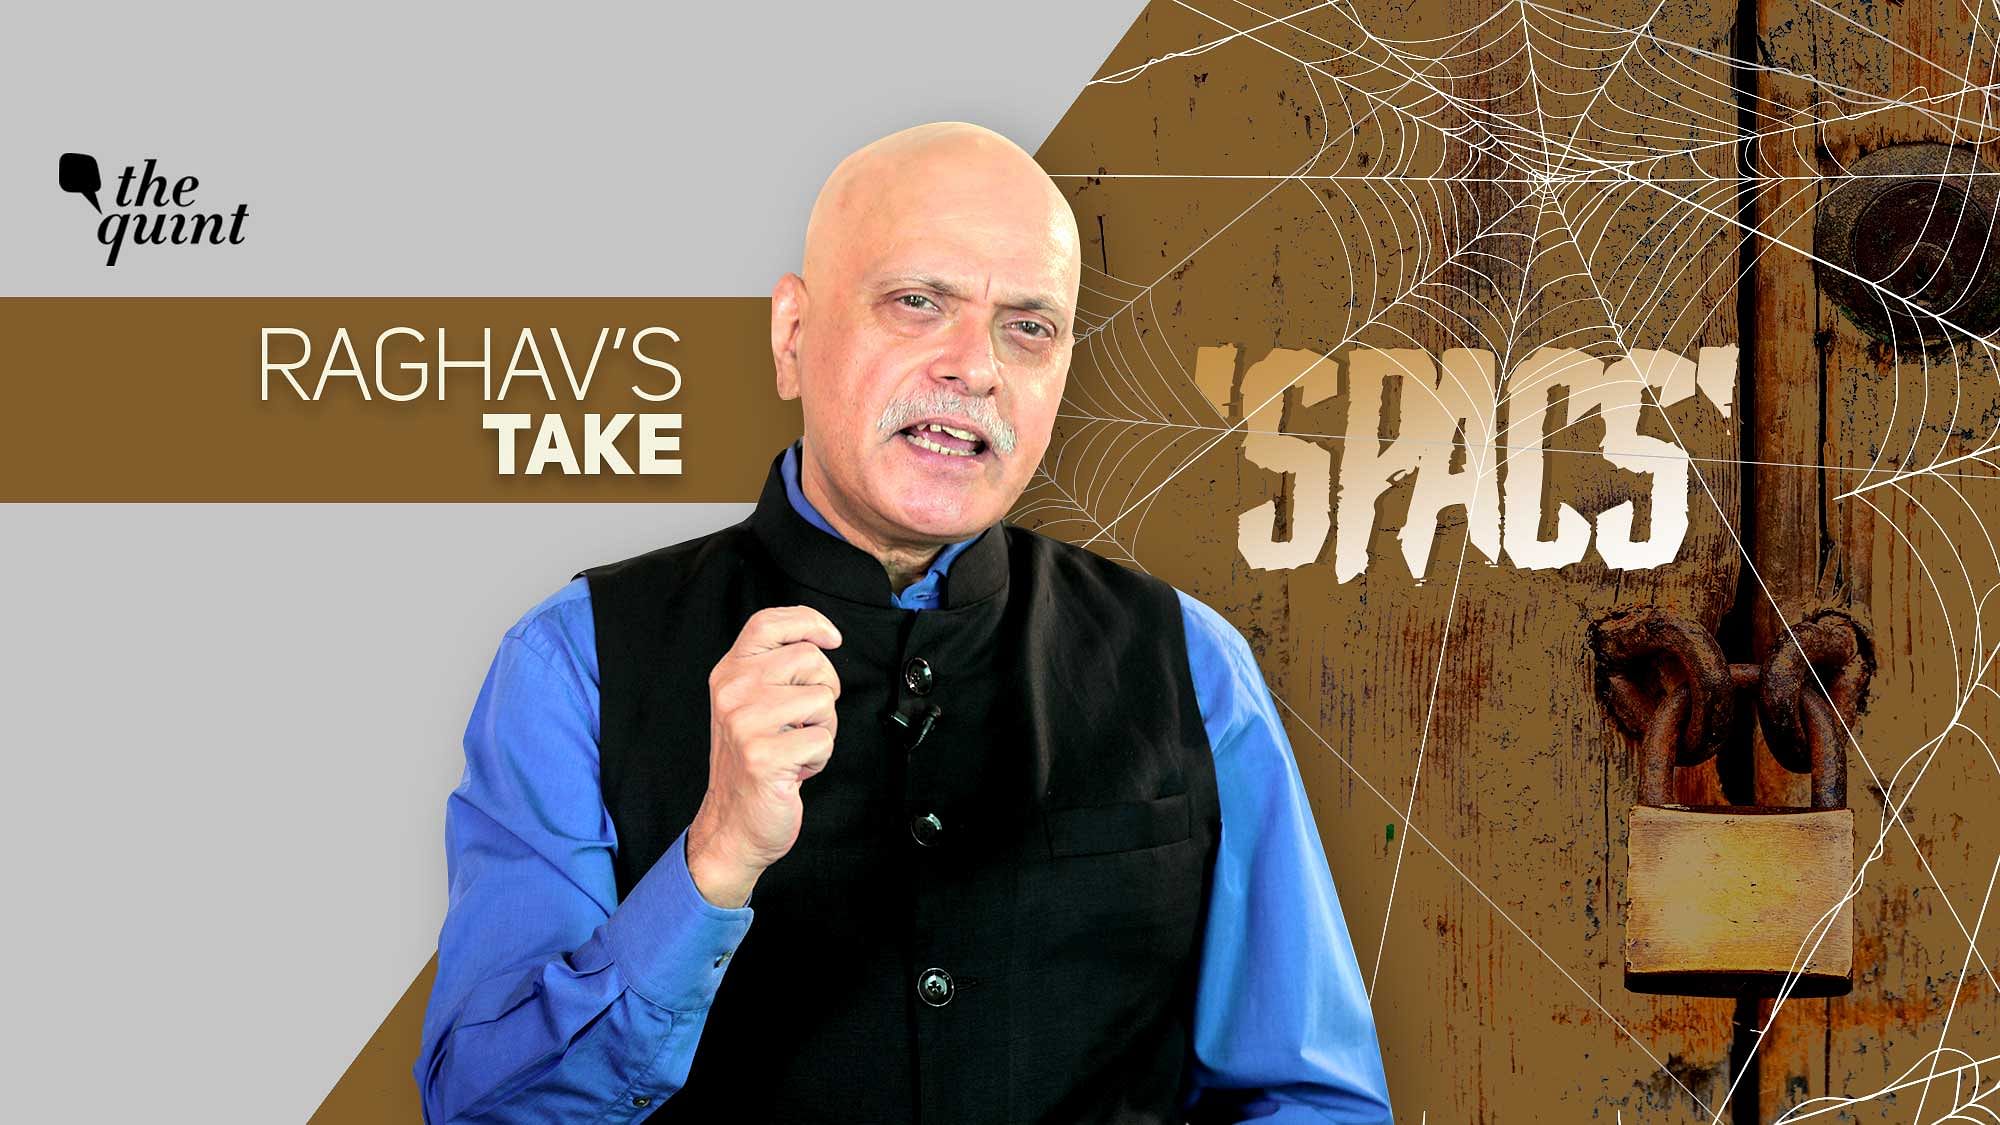 Image of The Quint’s Co-Founder &amp; Editor Raghav Bahl used for representational purposes.